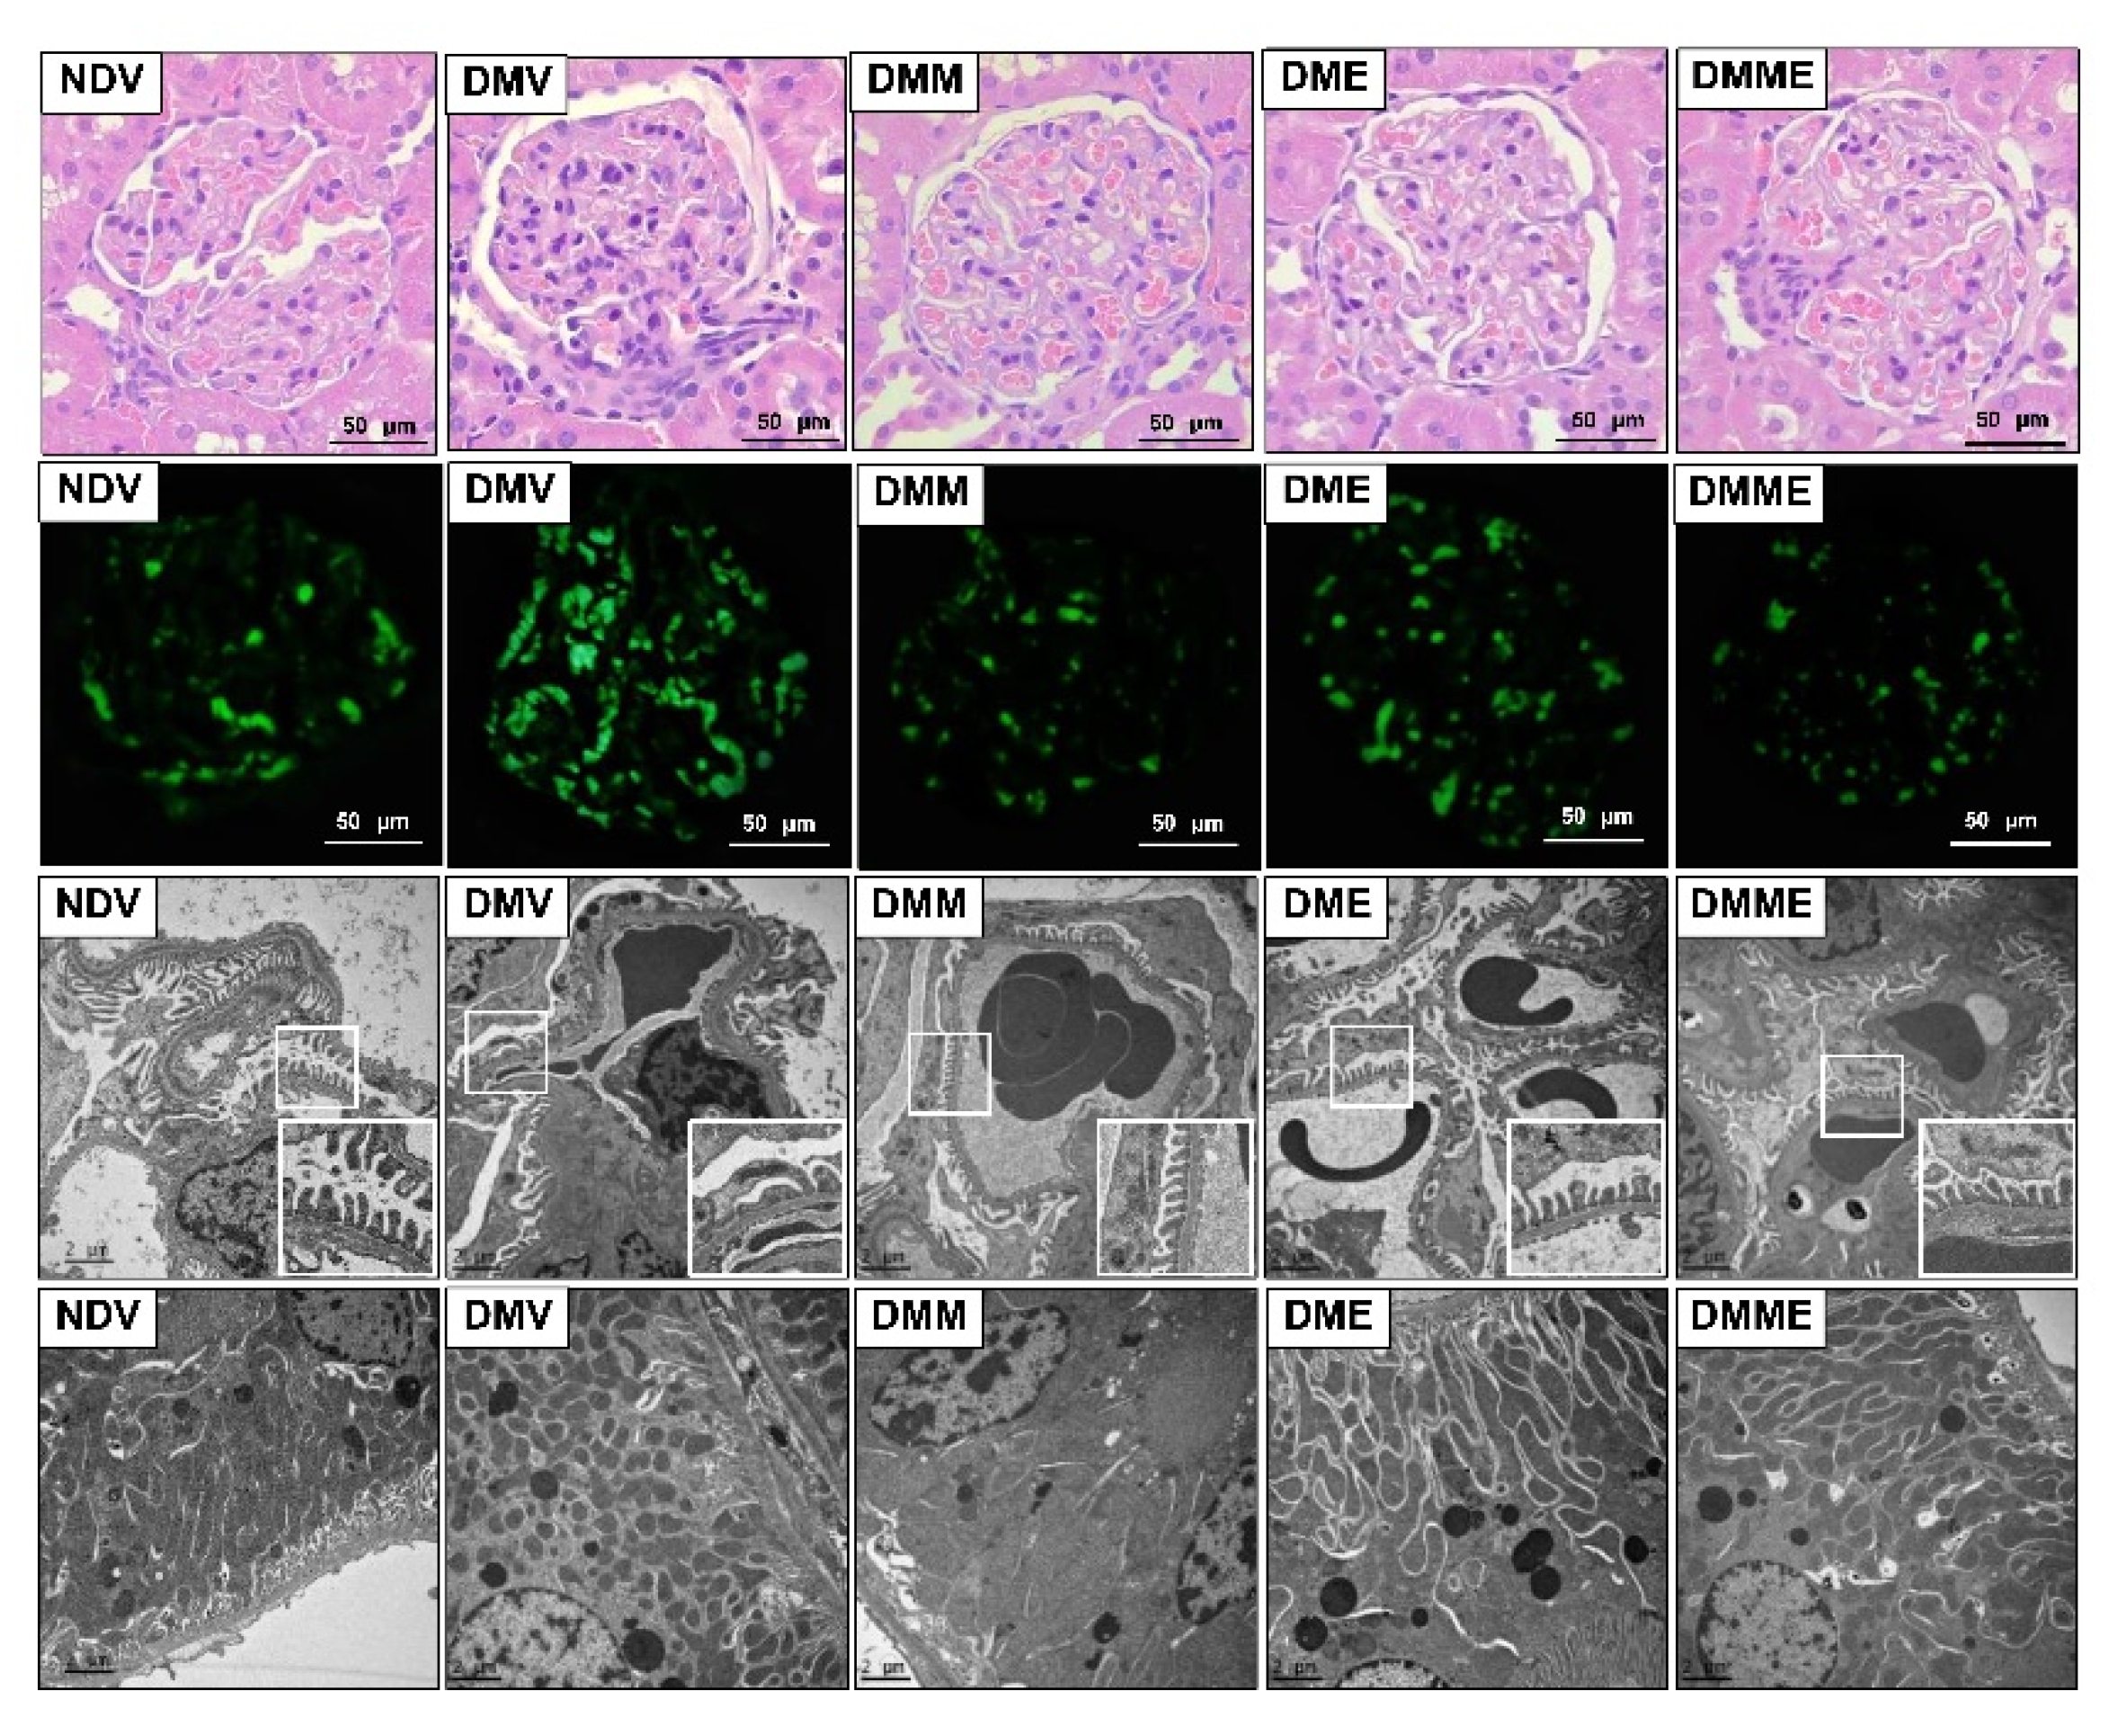 Biomolecules | Free Full-Text | Protective Effects of Purple Rice Husk  against Diabetic Nephropathy by Modulating PGC-1α/SIRT3/SOD2 Signaling and  Maintaining Mitochondrial Redox Equilibrium in Rats | HTML